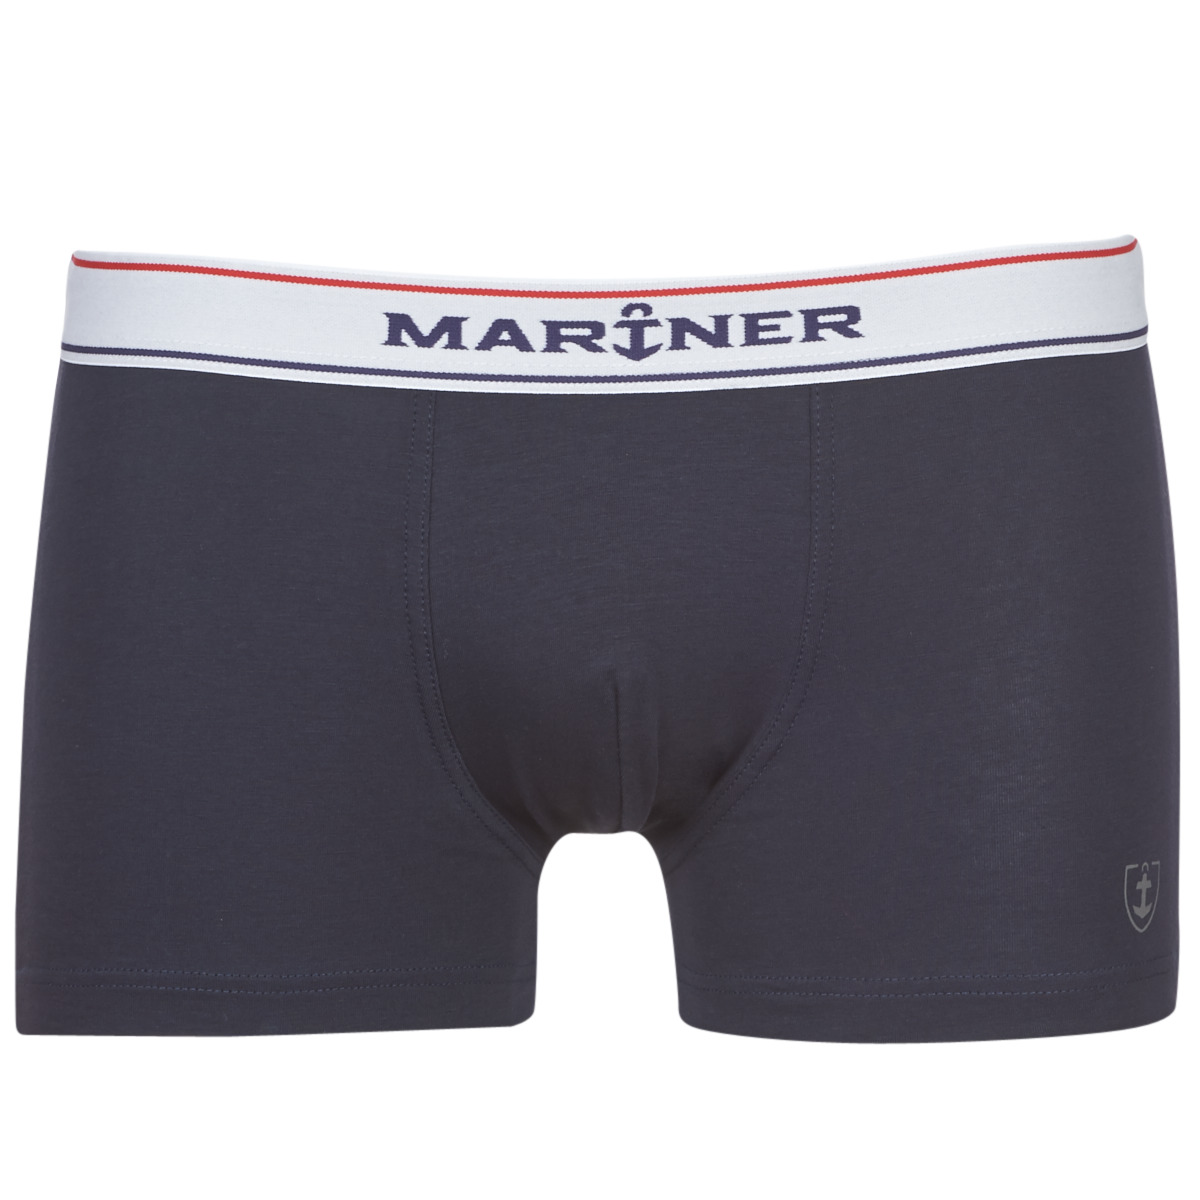 Mariner JEAN JACQUES Marine - Fast delivery  Spartoo Europe ! - Underwear  Boxer shorts Men 24,00 €